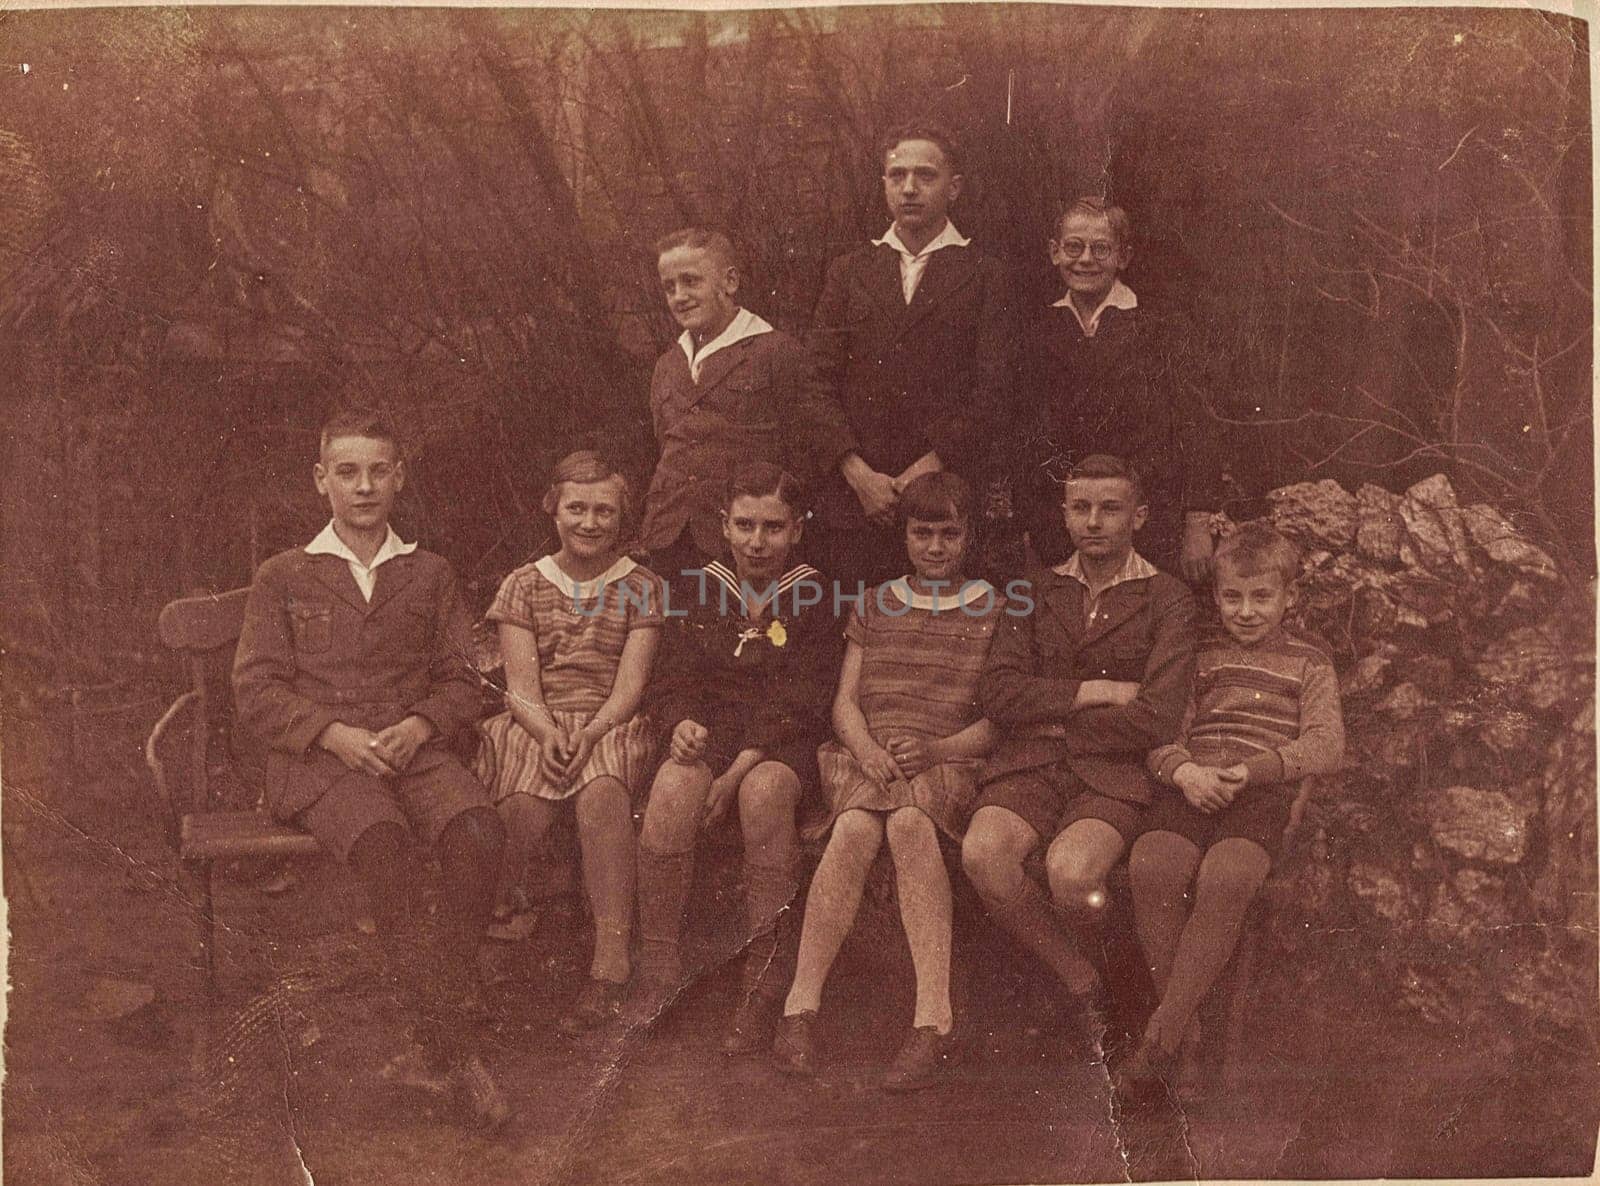 GERMANY - 1929: Vintage photo shows group of young people pose outdoor. Photo with sepia effect.